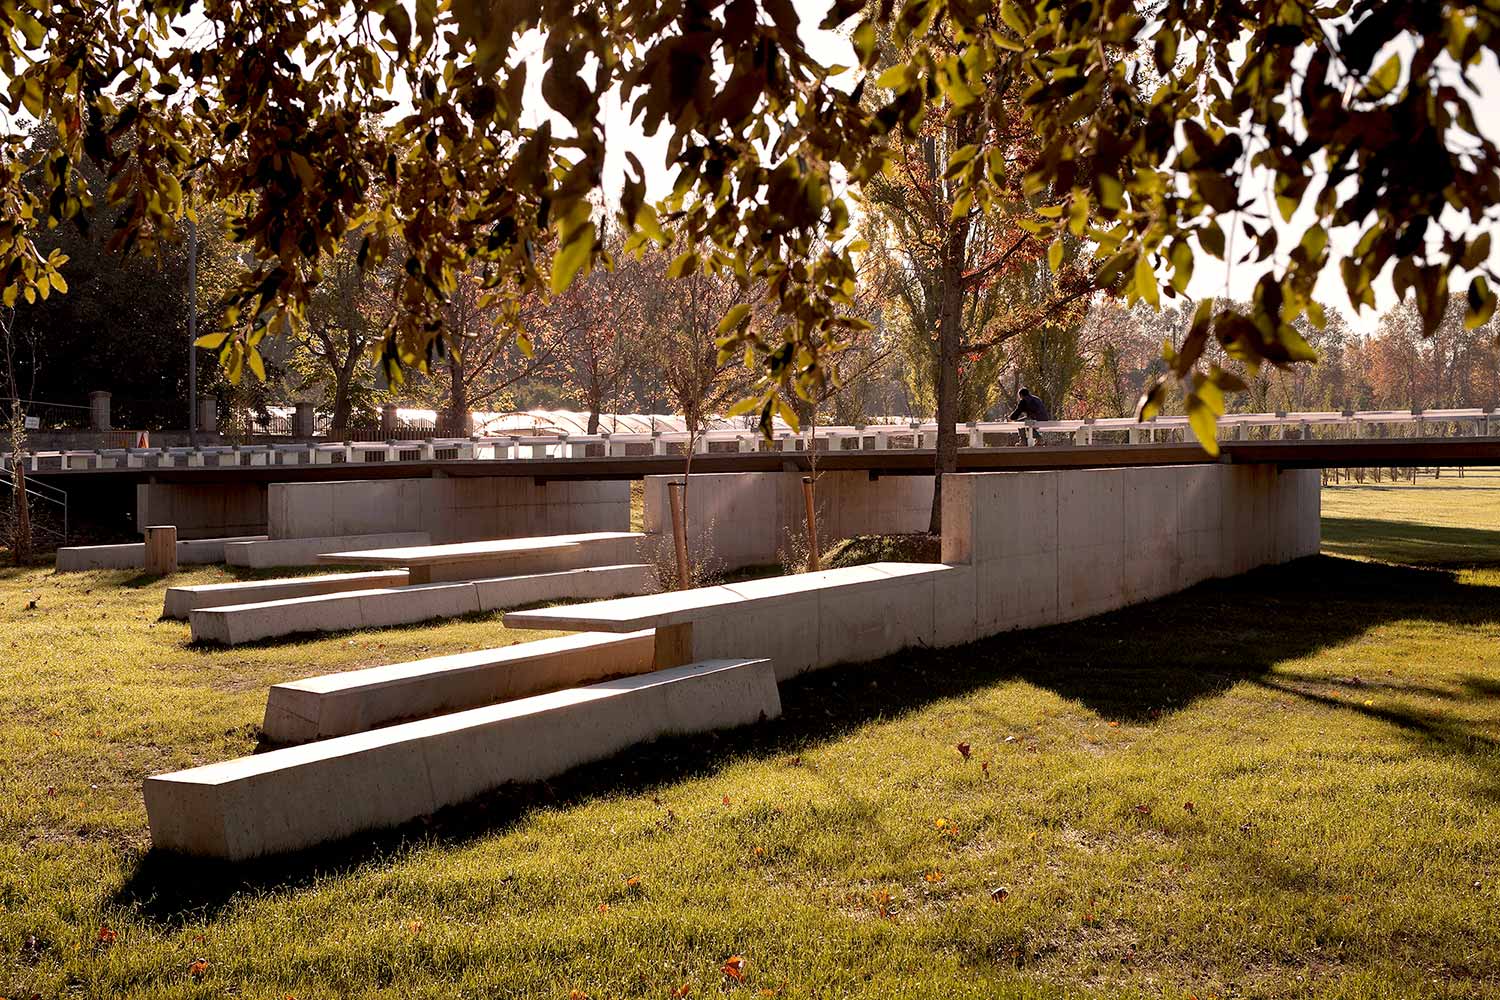 Alday’s Aranzadi Park includes a “floodable forest” with a raised walkway near permanent tables and seating.